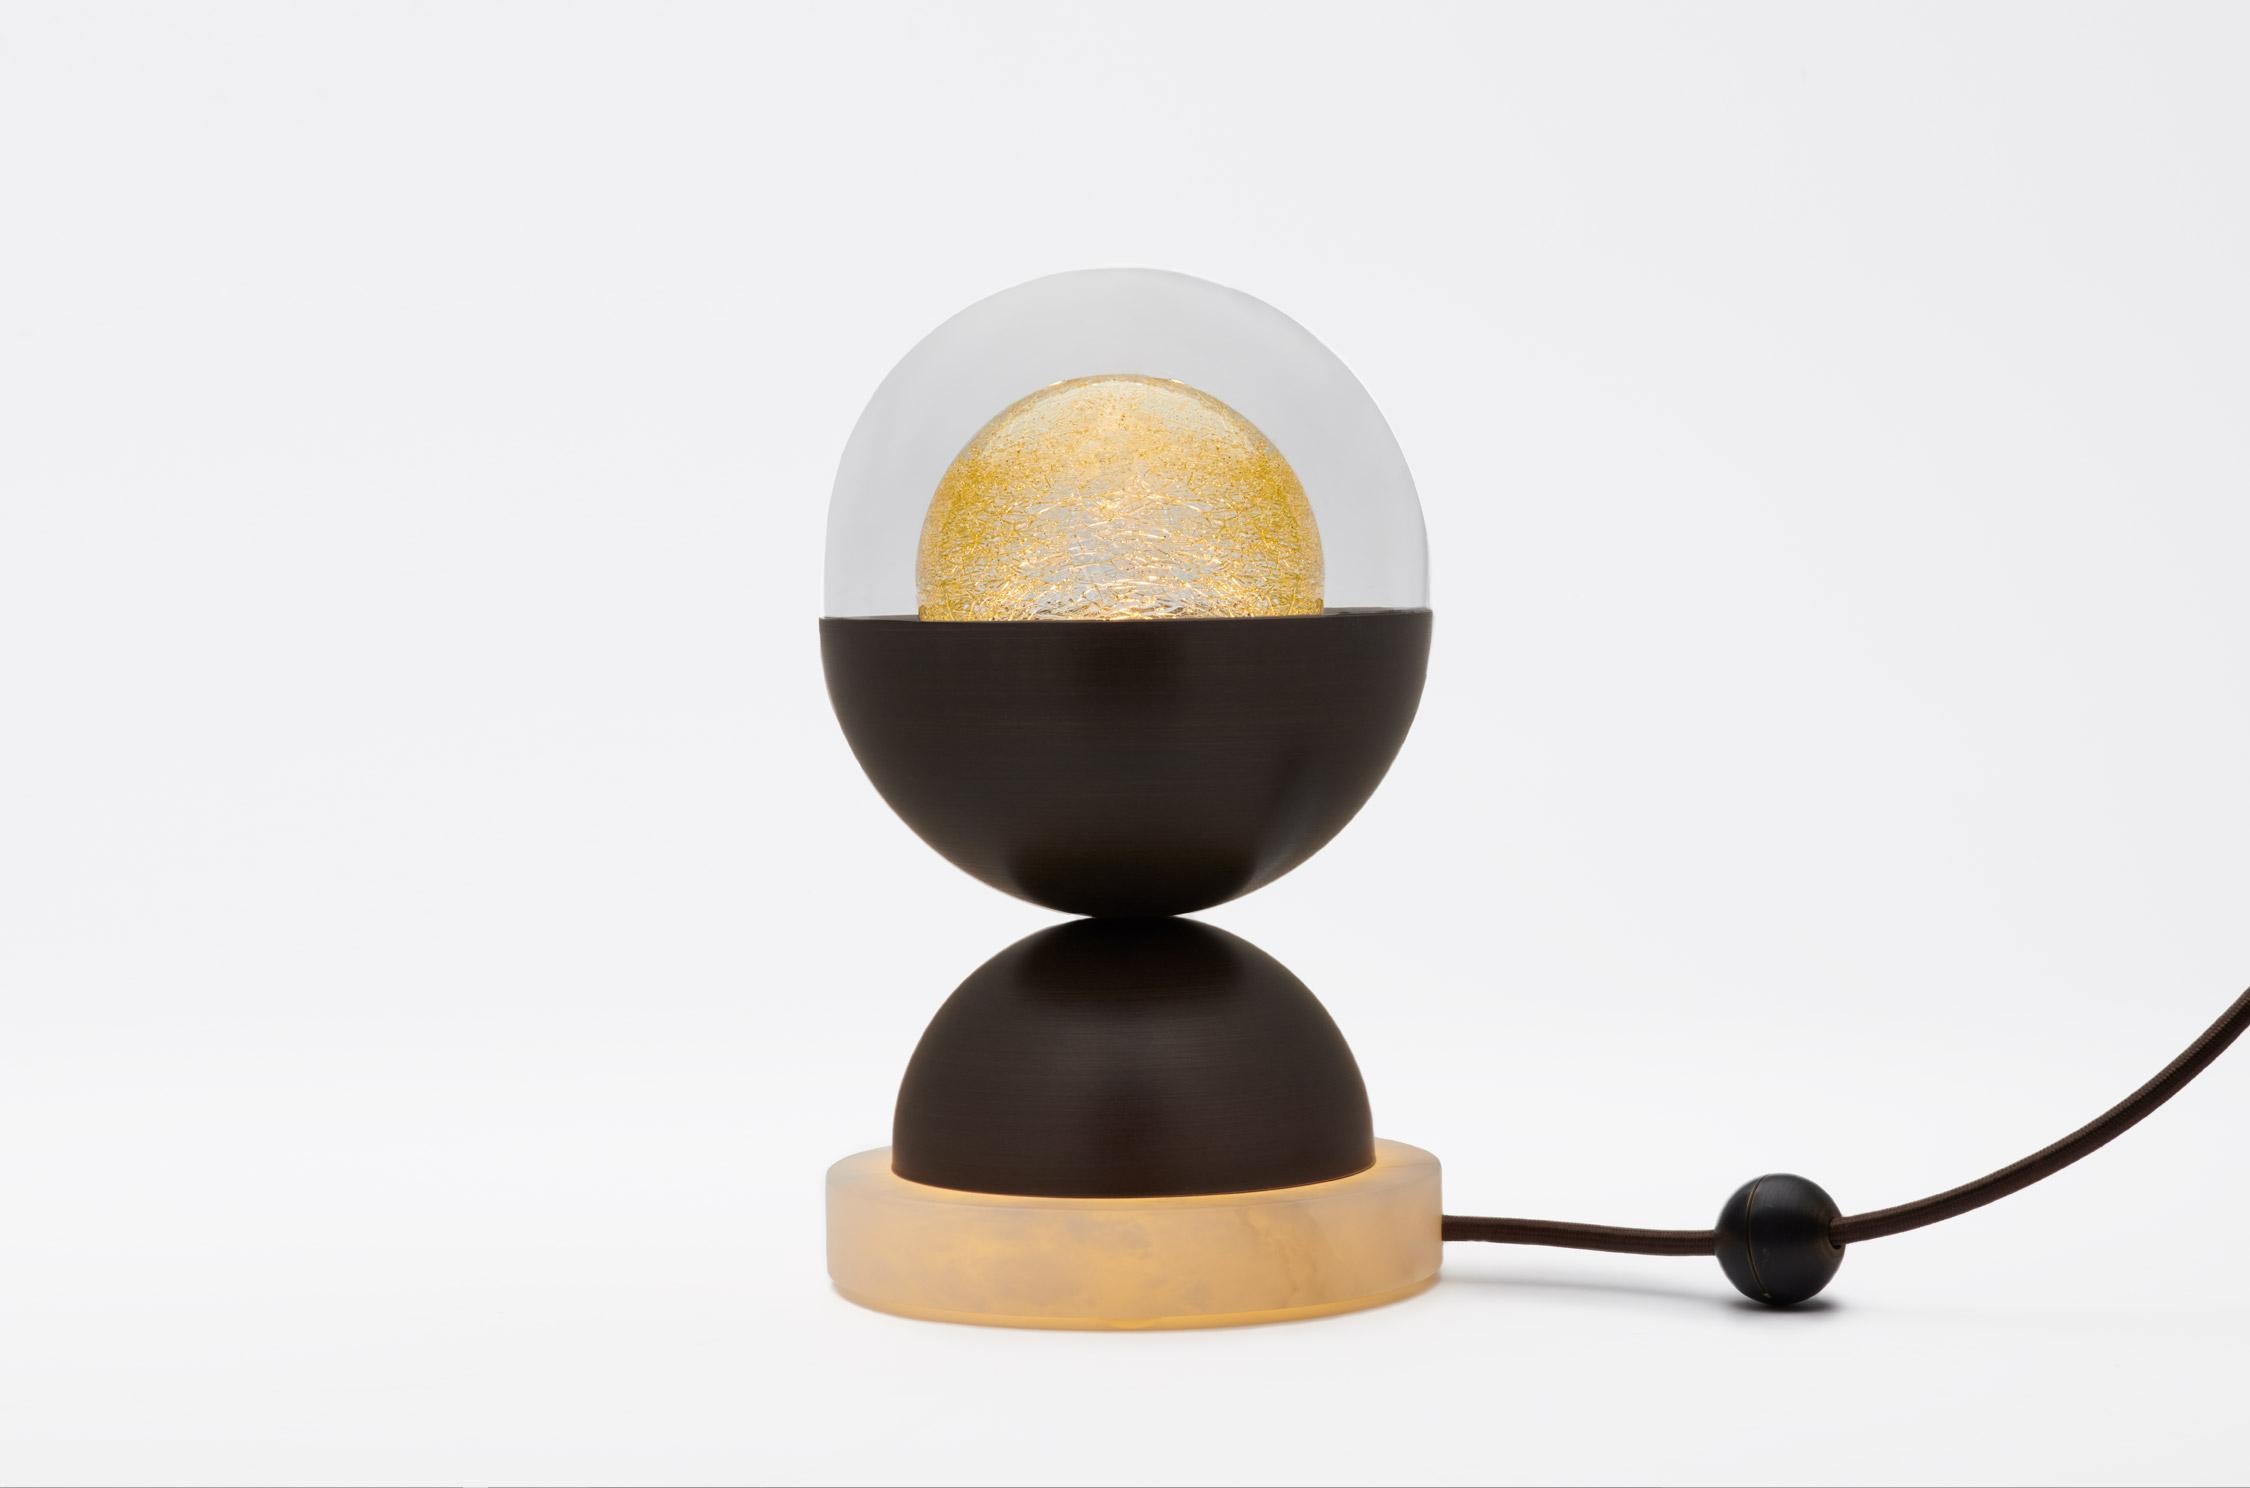 The Bloom table lamp's igenious design consists of glass, metal, and marble parts. The double glass orb (our Kadur pendant) rests inside a metal half-sphere, which is in turn balanced on another metal half-sphere attached to a round marble base. The